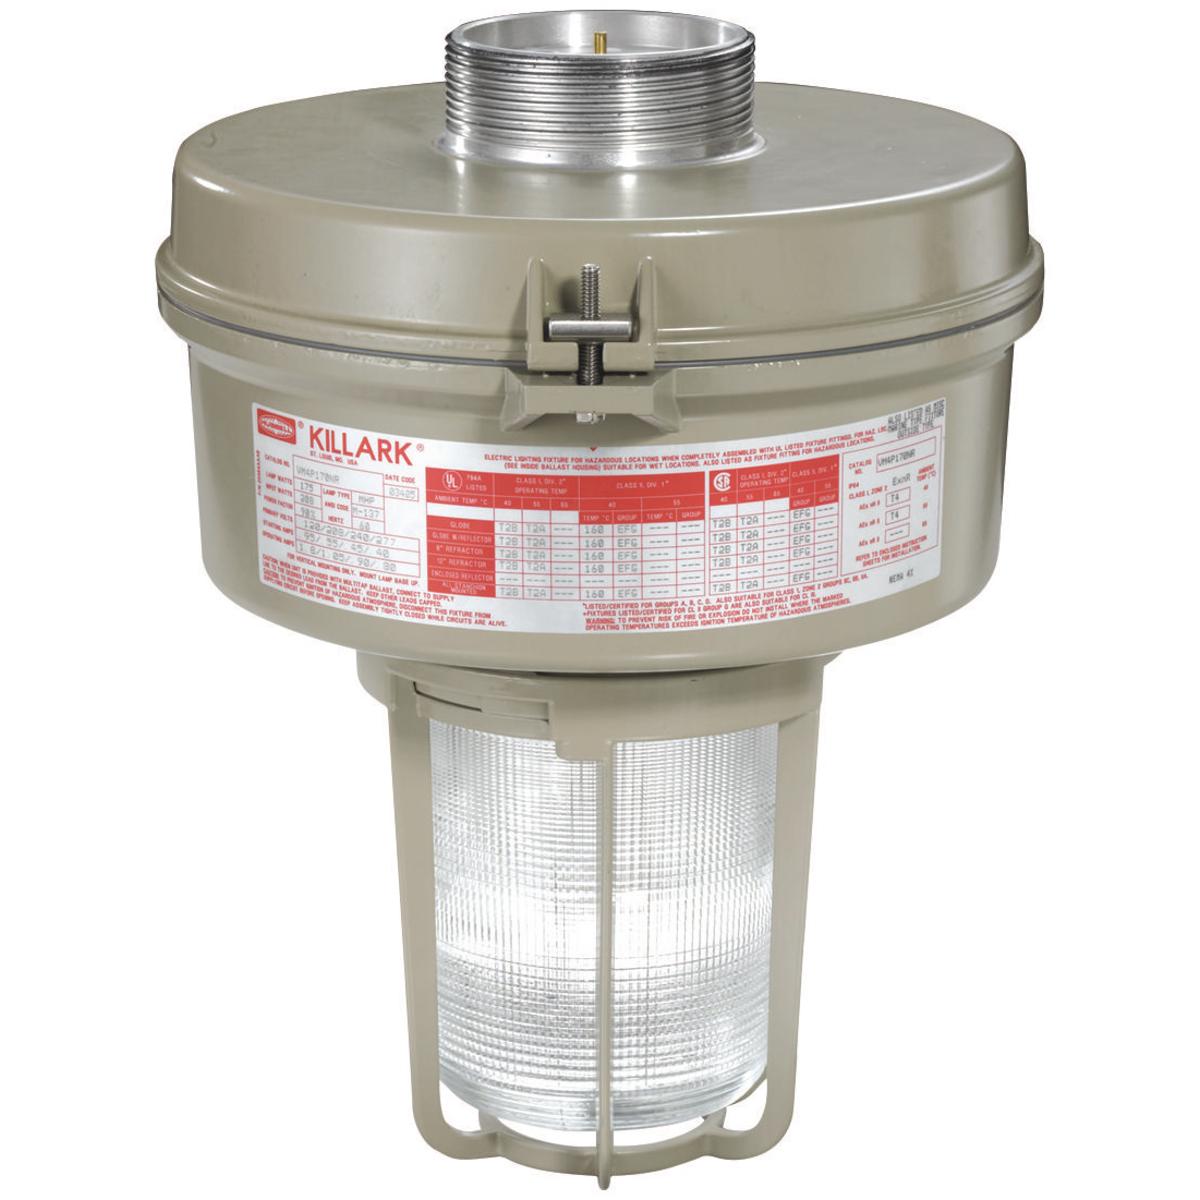 Hubbell VM3P200EZR1G VM3 Series - 200W Metal Halide Quadri-Volt - EZ Mount Adapter -  Type I Glass Refractor and Guard  ; Ballast tank and splice box – corrosion resistant copper-free aluminum alloy with baked powder epoxy/polyester finish, electrostatically applied for compl